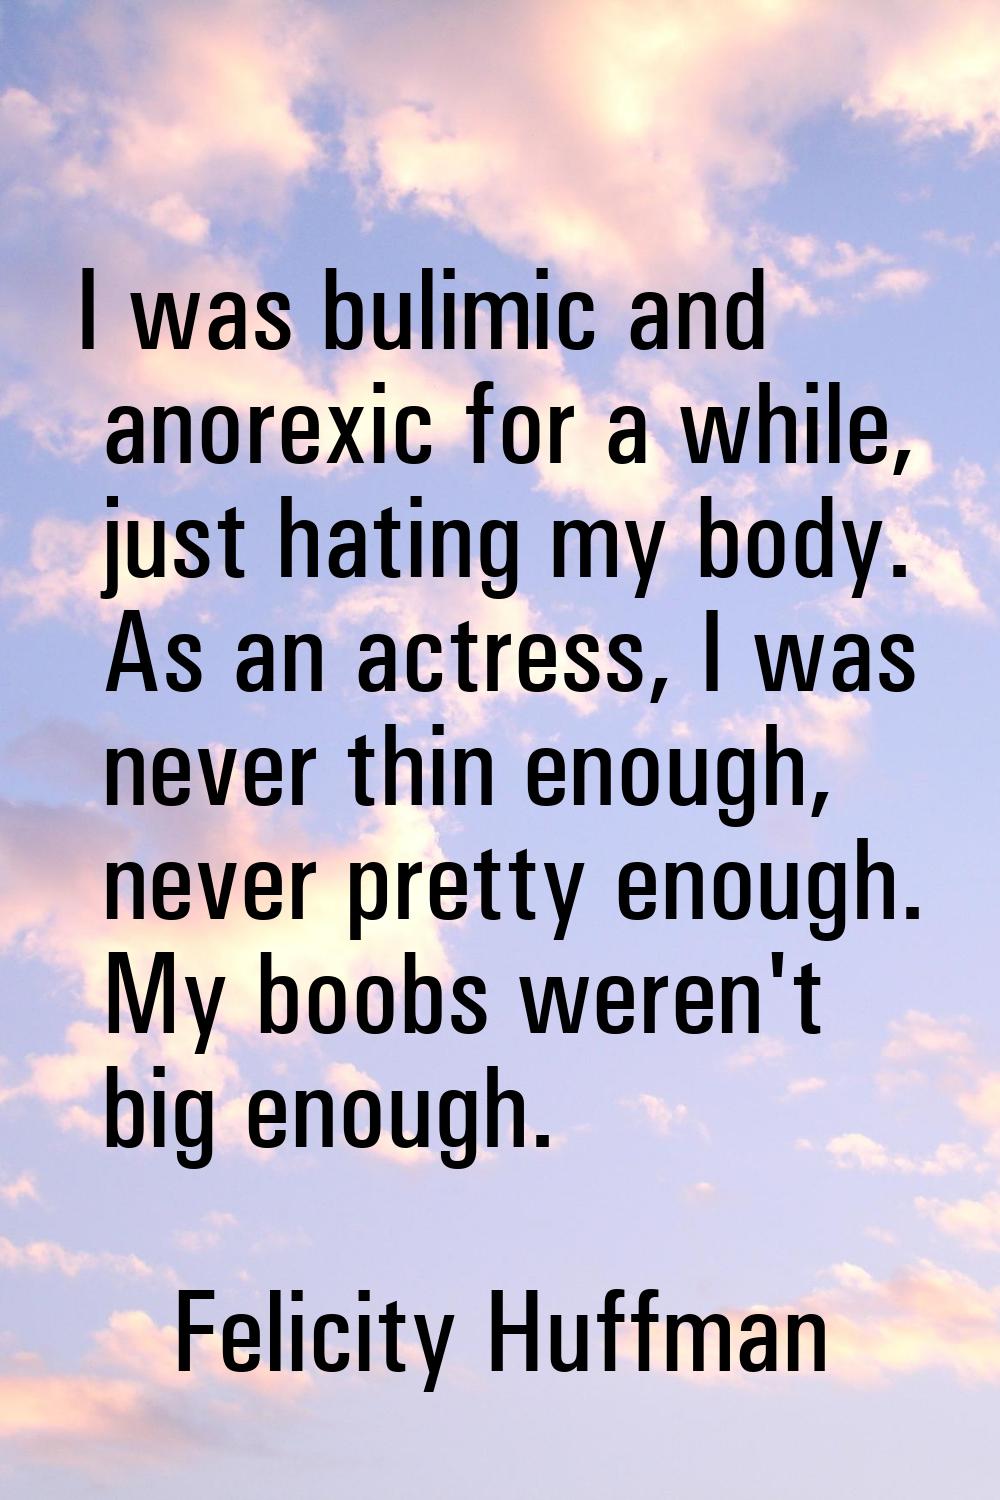 I was bulimic and anorexic for a while, just hating my body. As an actress, I was never thin enough